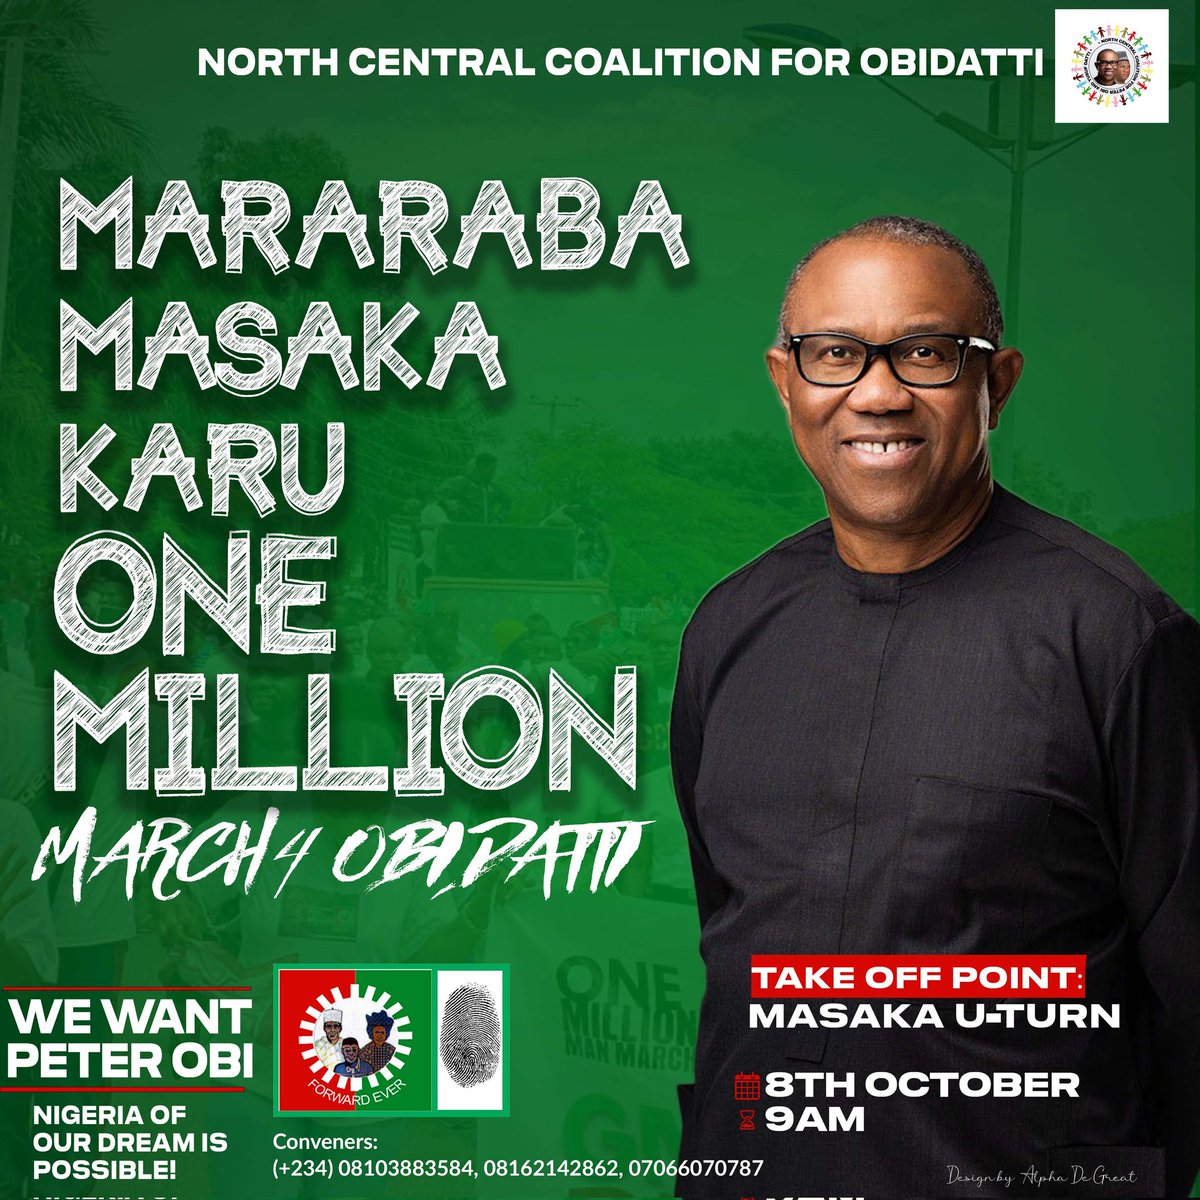 Somebody tell me we are about setting a mega hold up in history 😂
#1MillionMarch4PeterObi